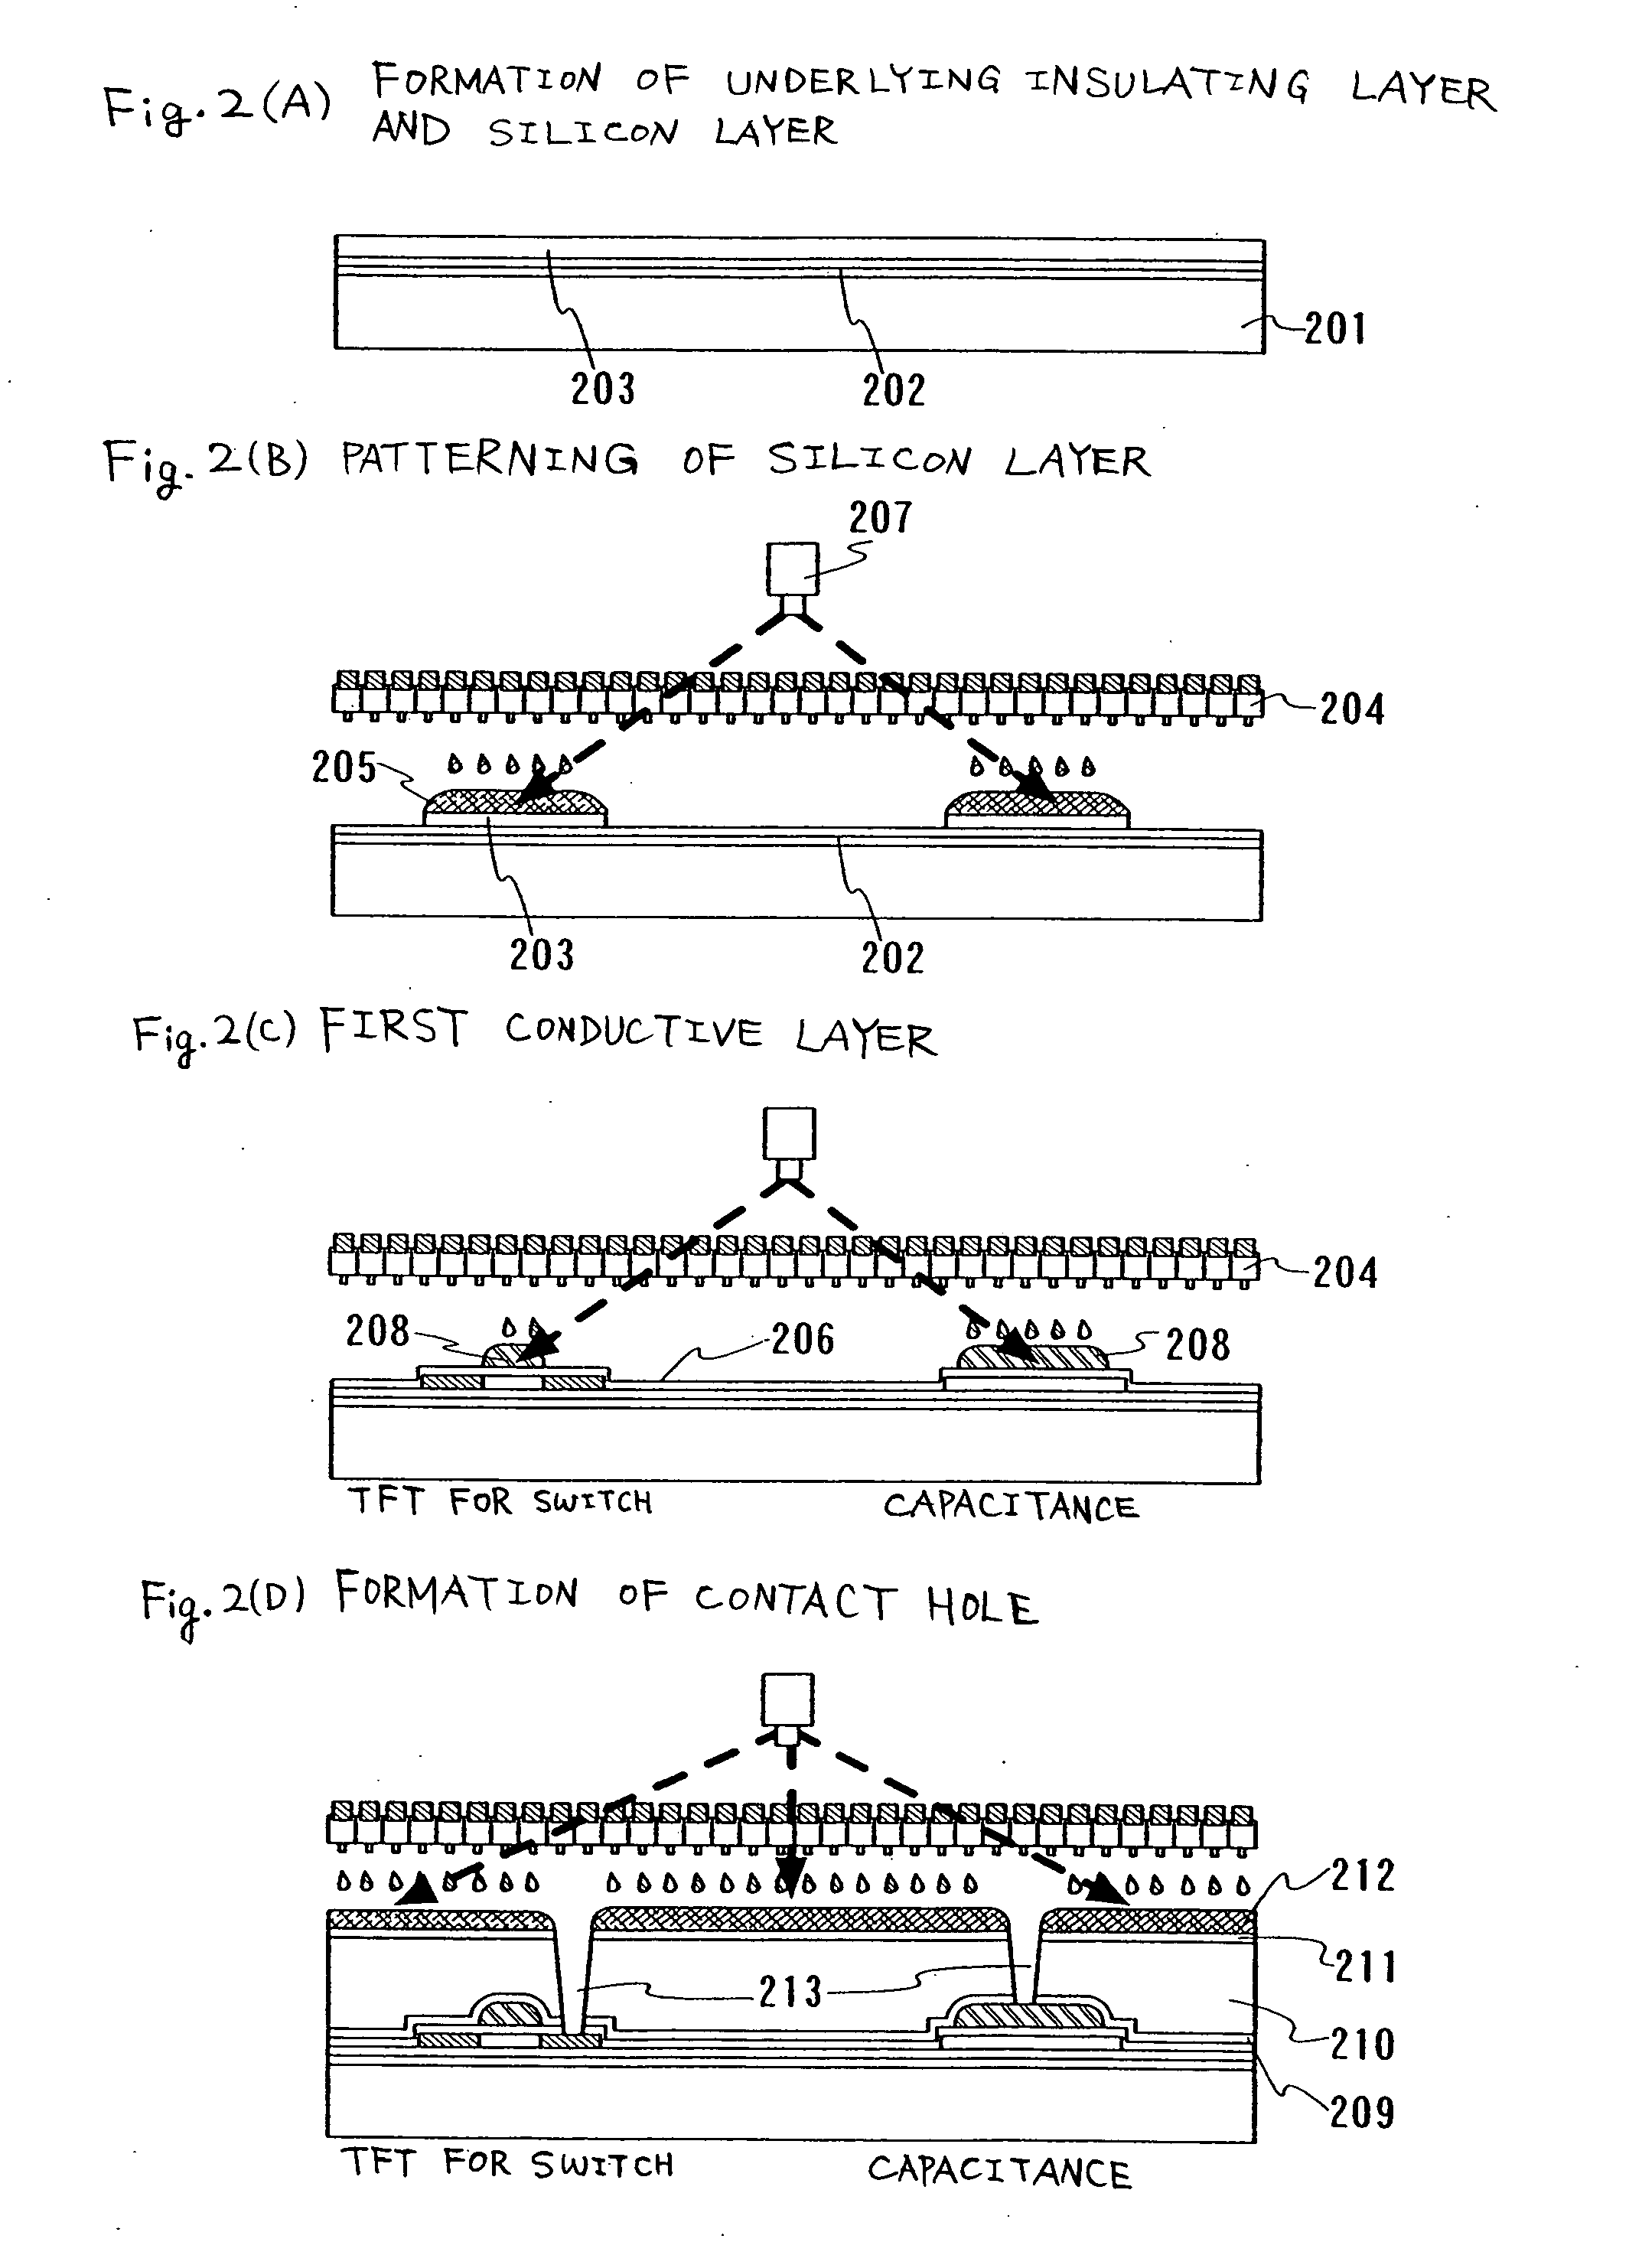 Liquid drop jetting apparatus using charged beam and method for manufacturing a pattern using the apparatus